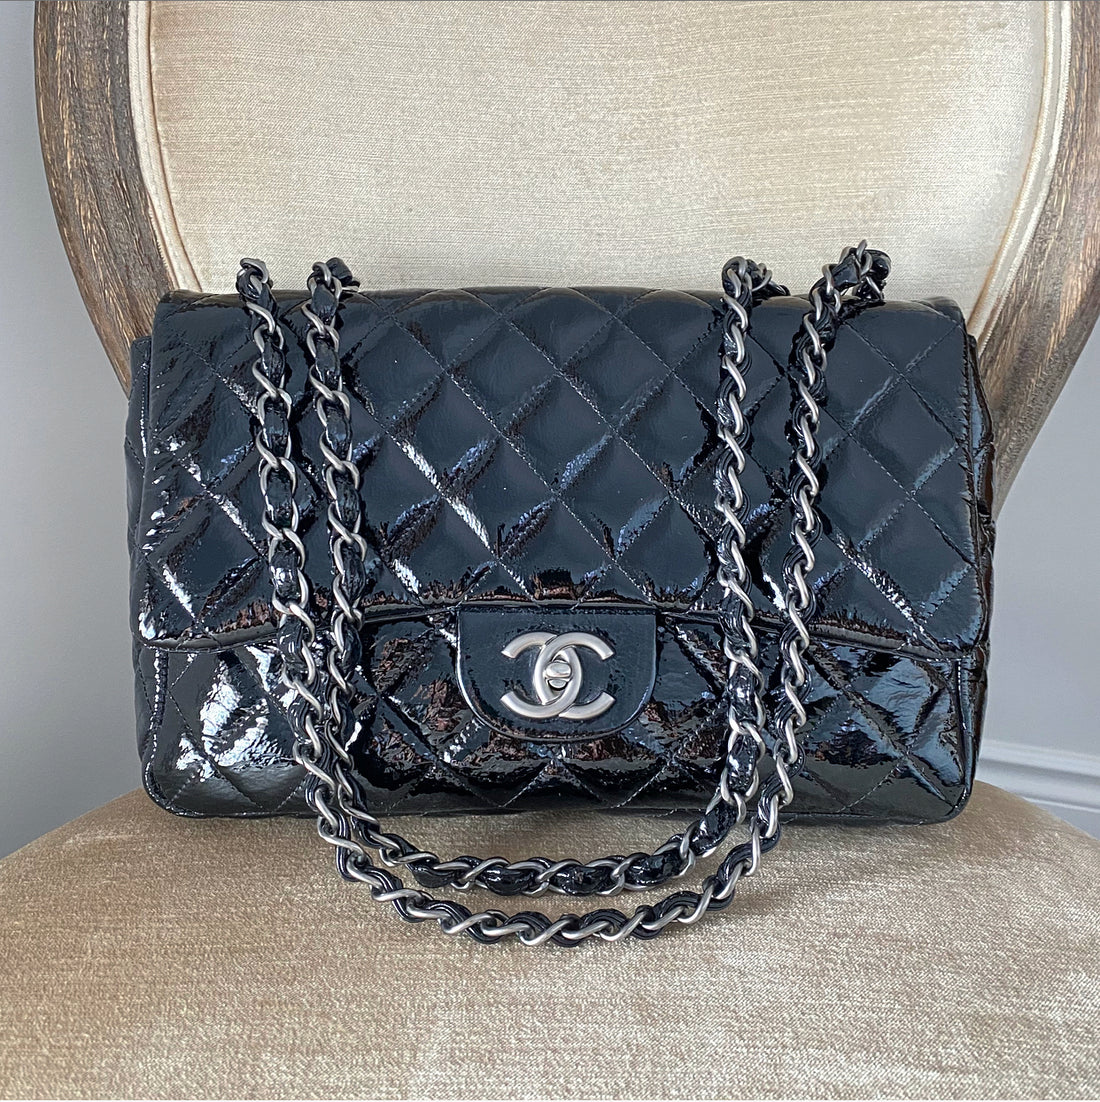 Chanel Red Quilted Patent Leather 2.55 Reissue Accordion Flap Bag